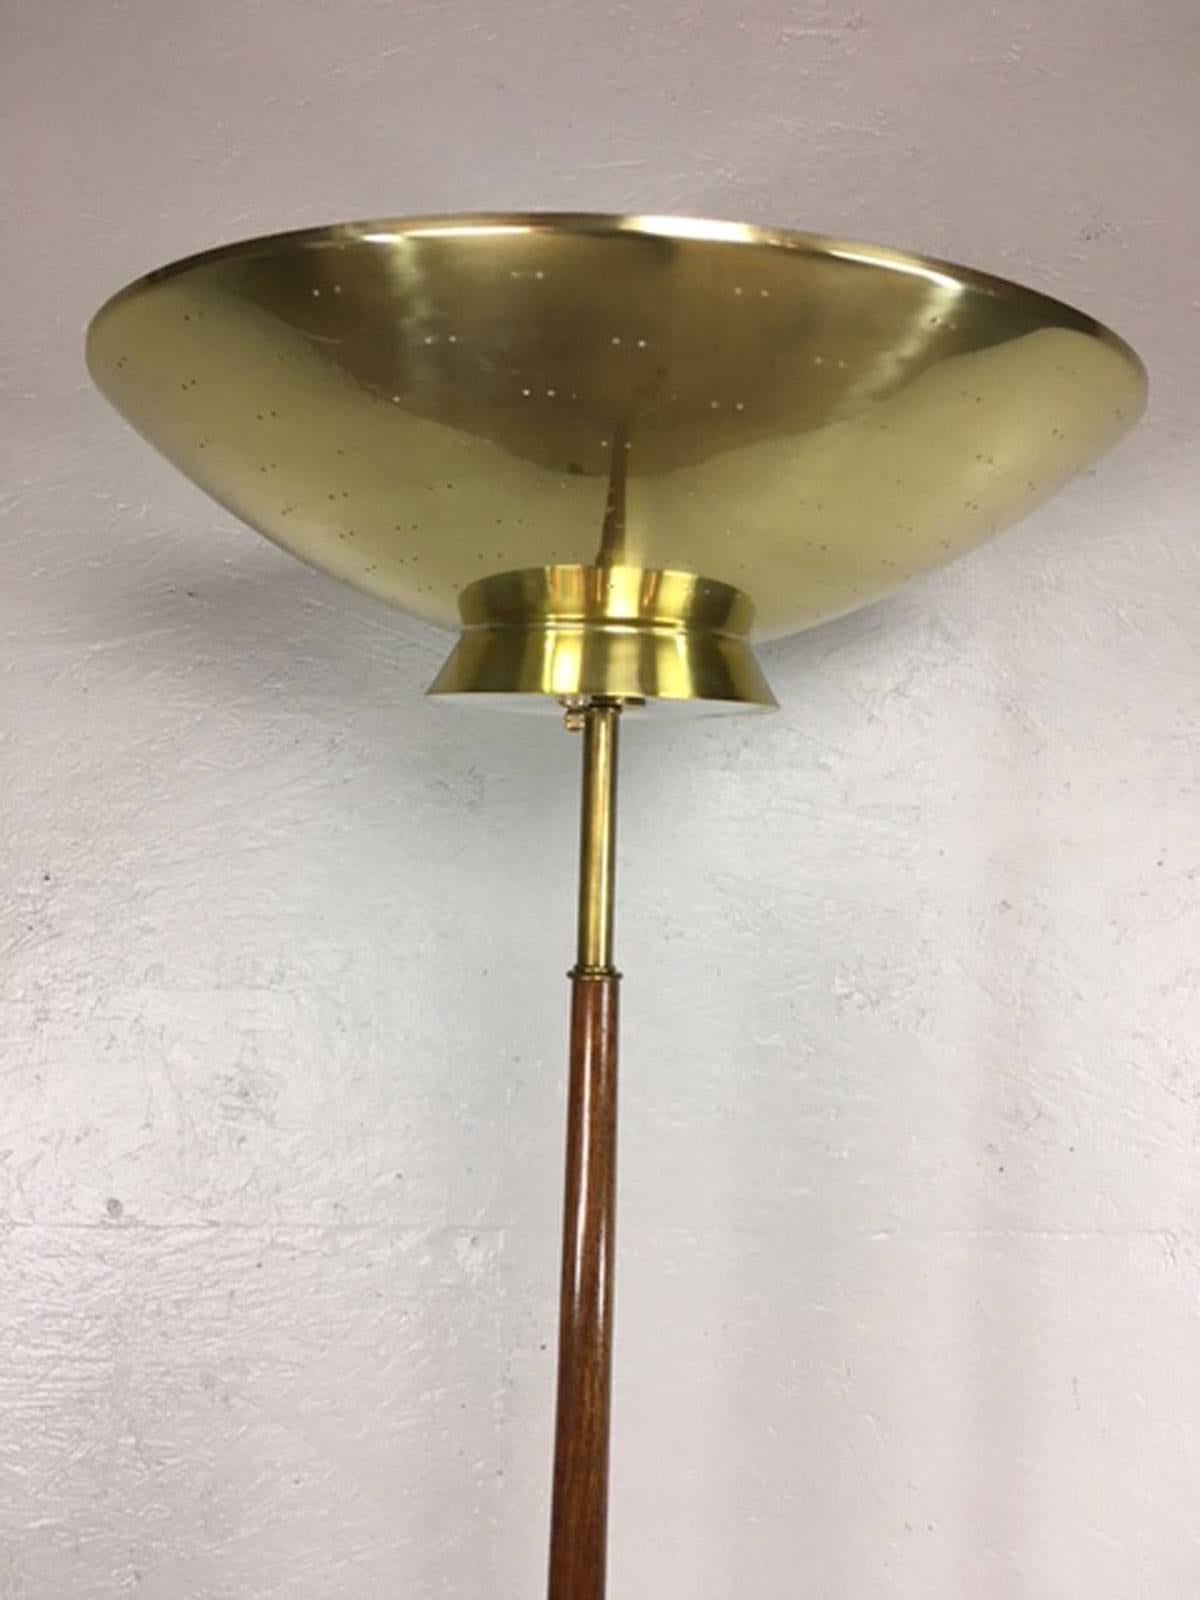 Superb Gerald Thurston brass-plated dome floor lamp, wooden pole, and three legs. Very good original condition.